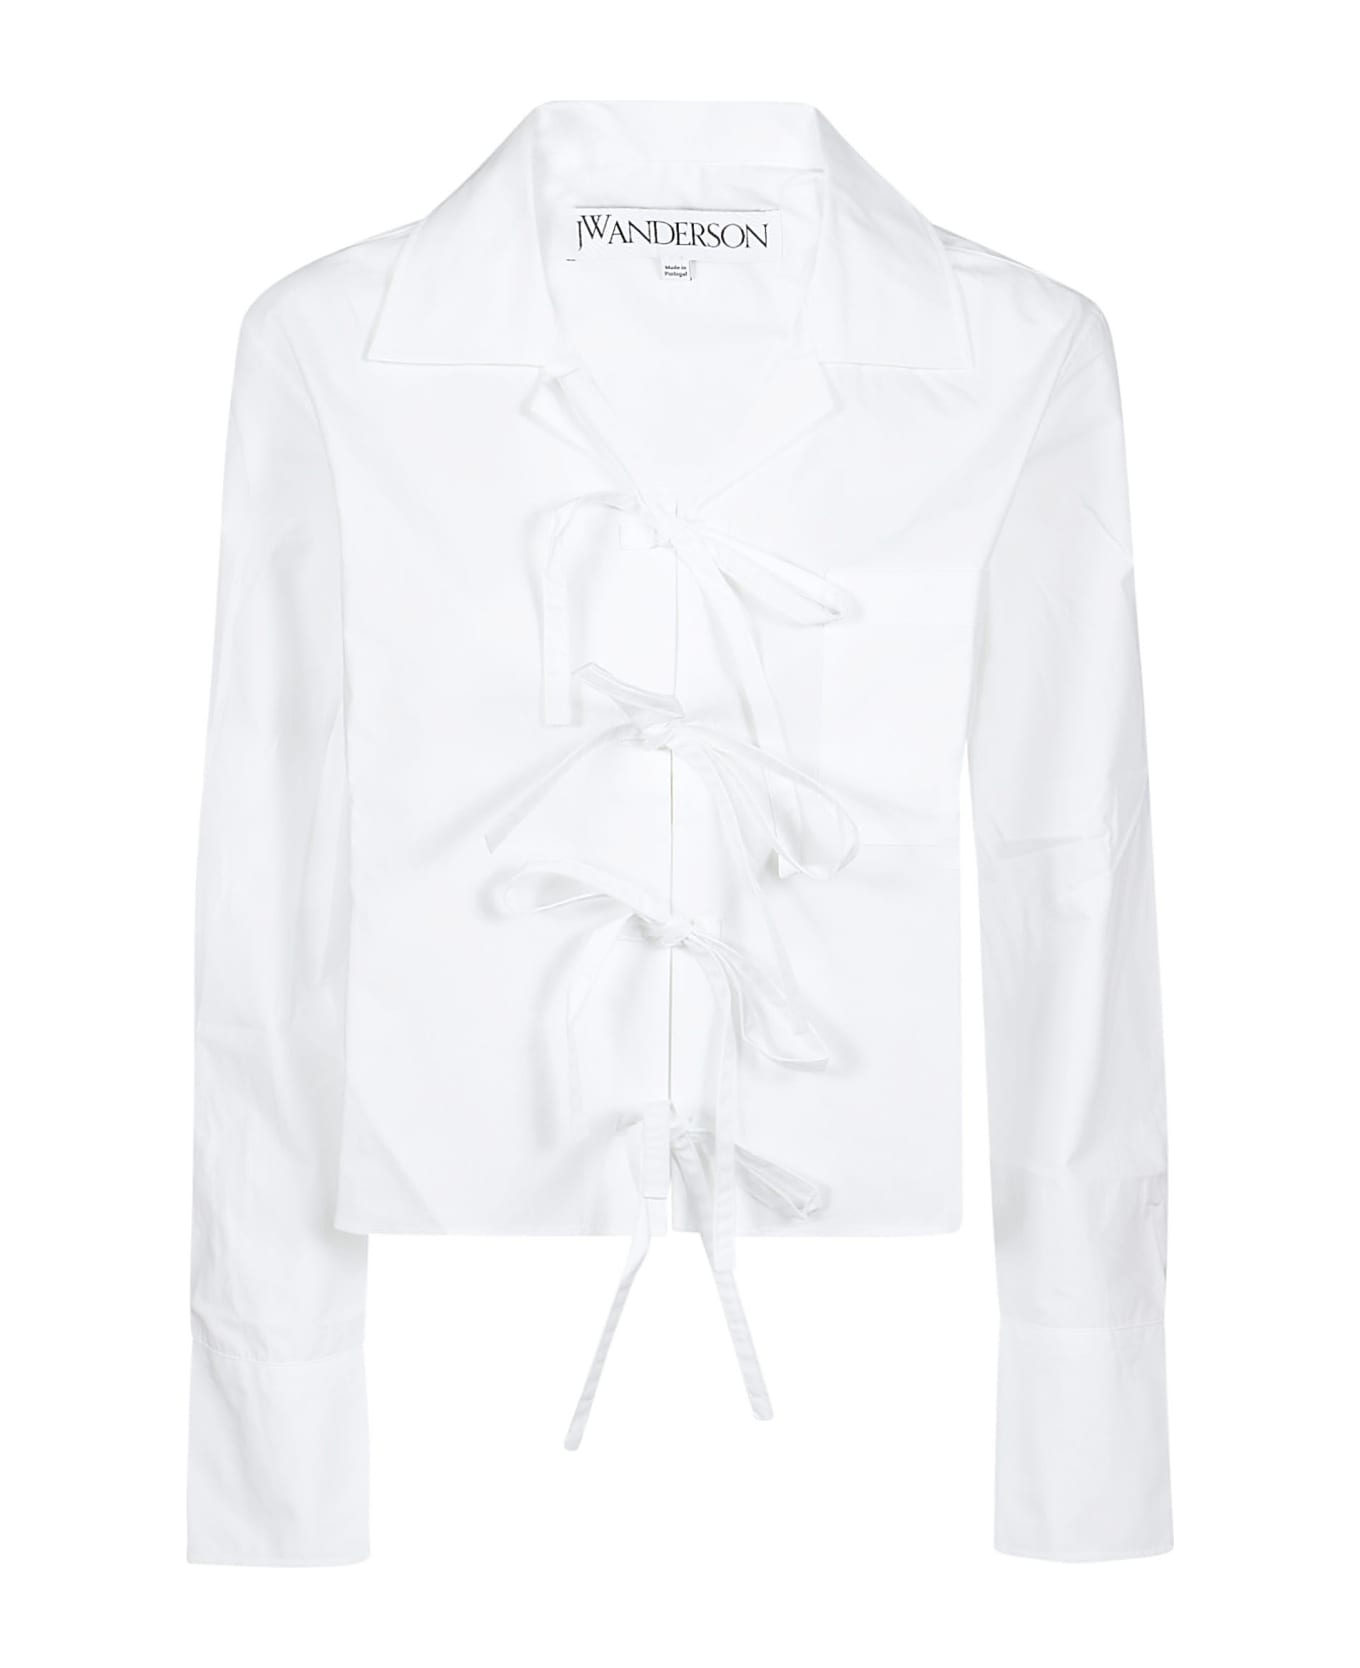 J.W. Anderson Bow Tie Cropped Shirt - White シャツ